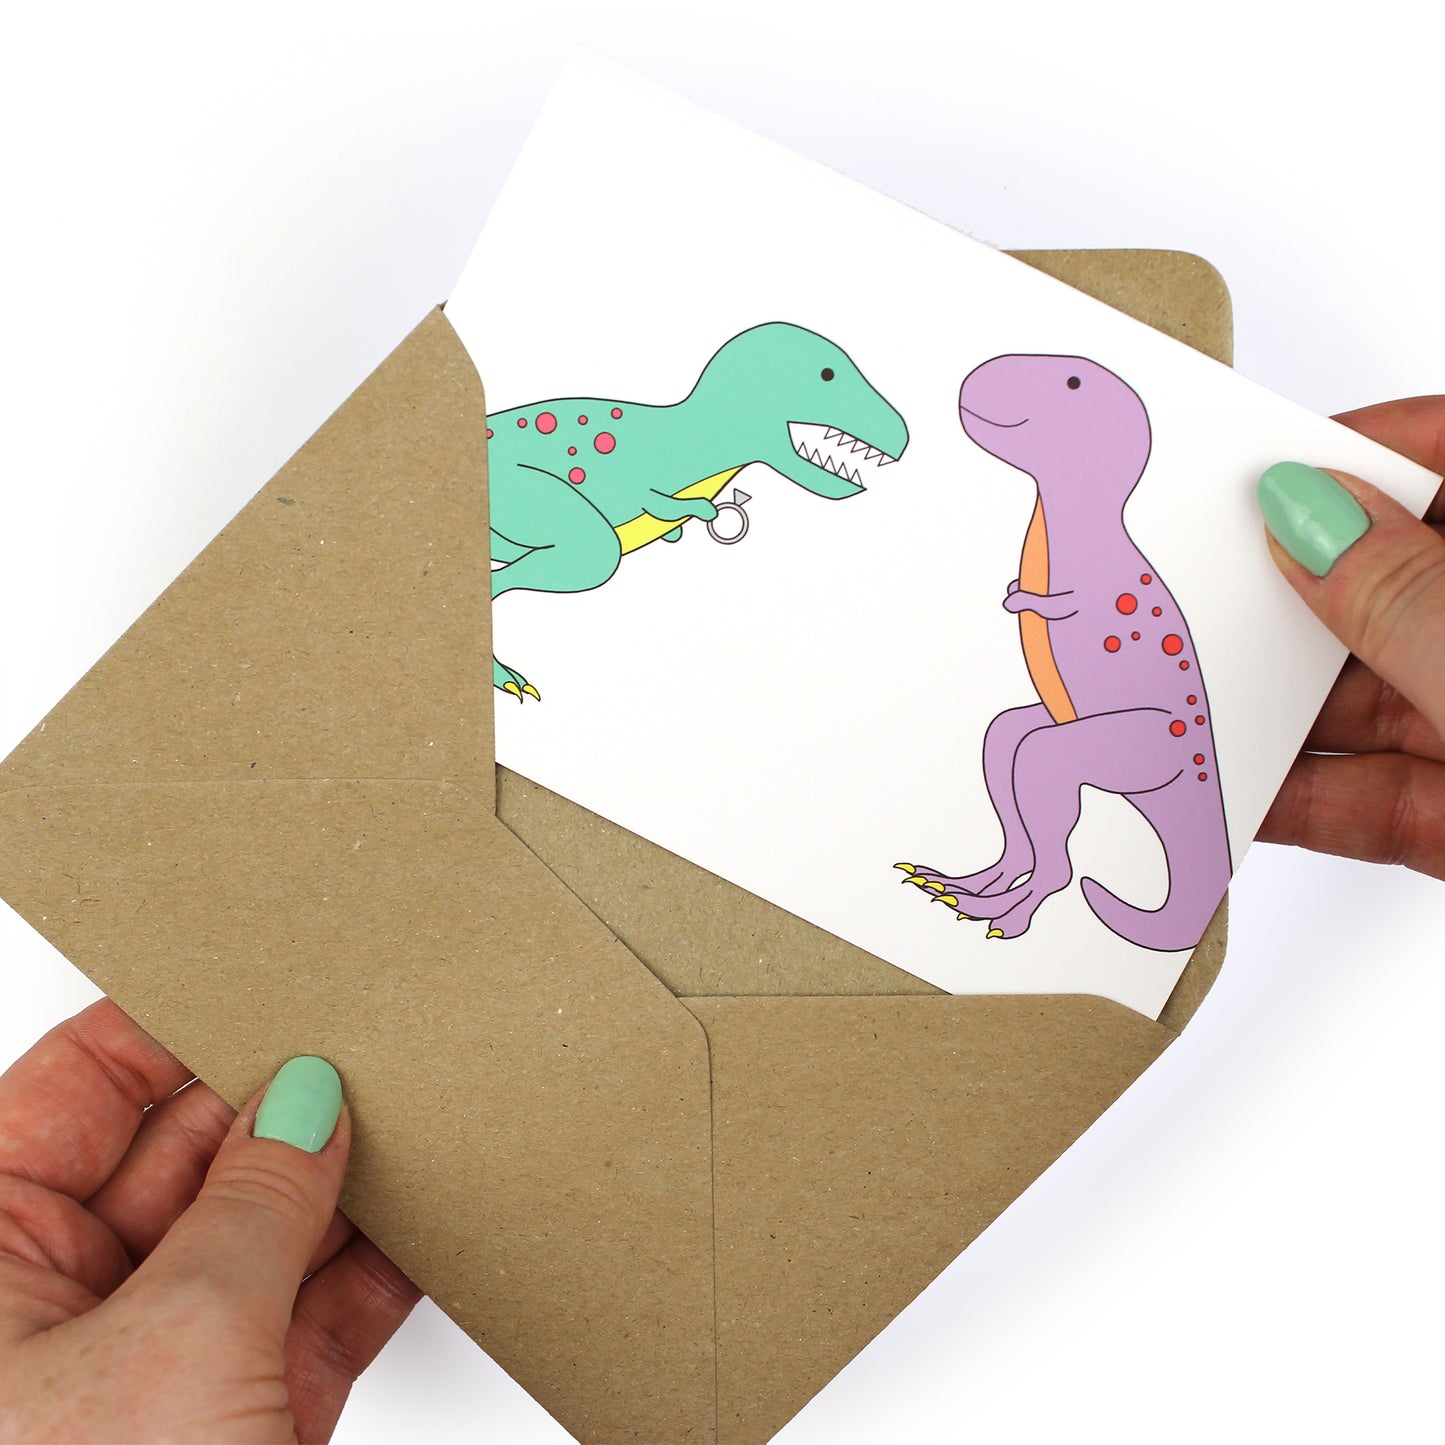 hands holding an envelope while removing the dinosaur engagement card from the envelope